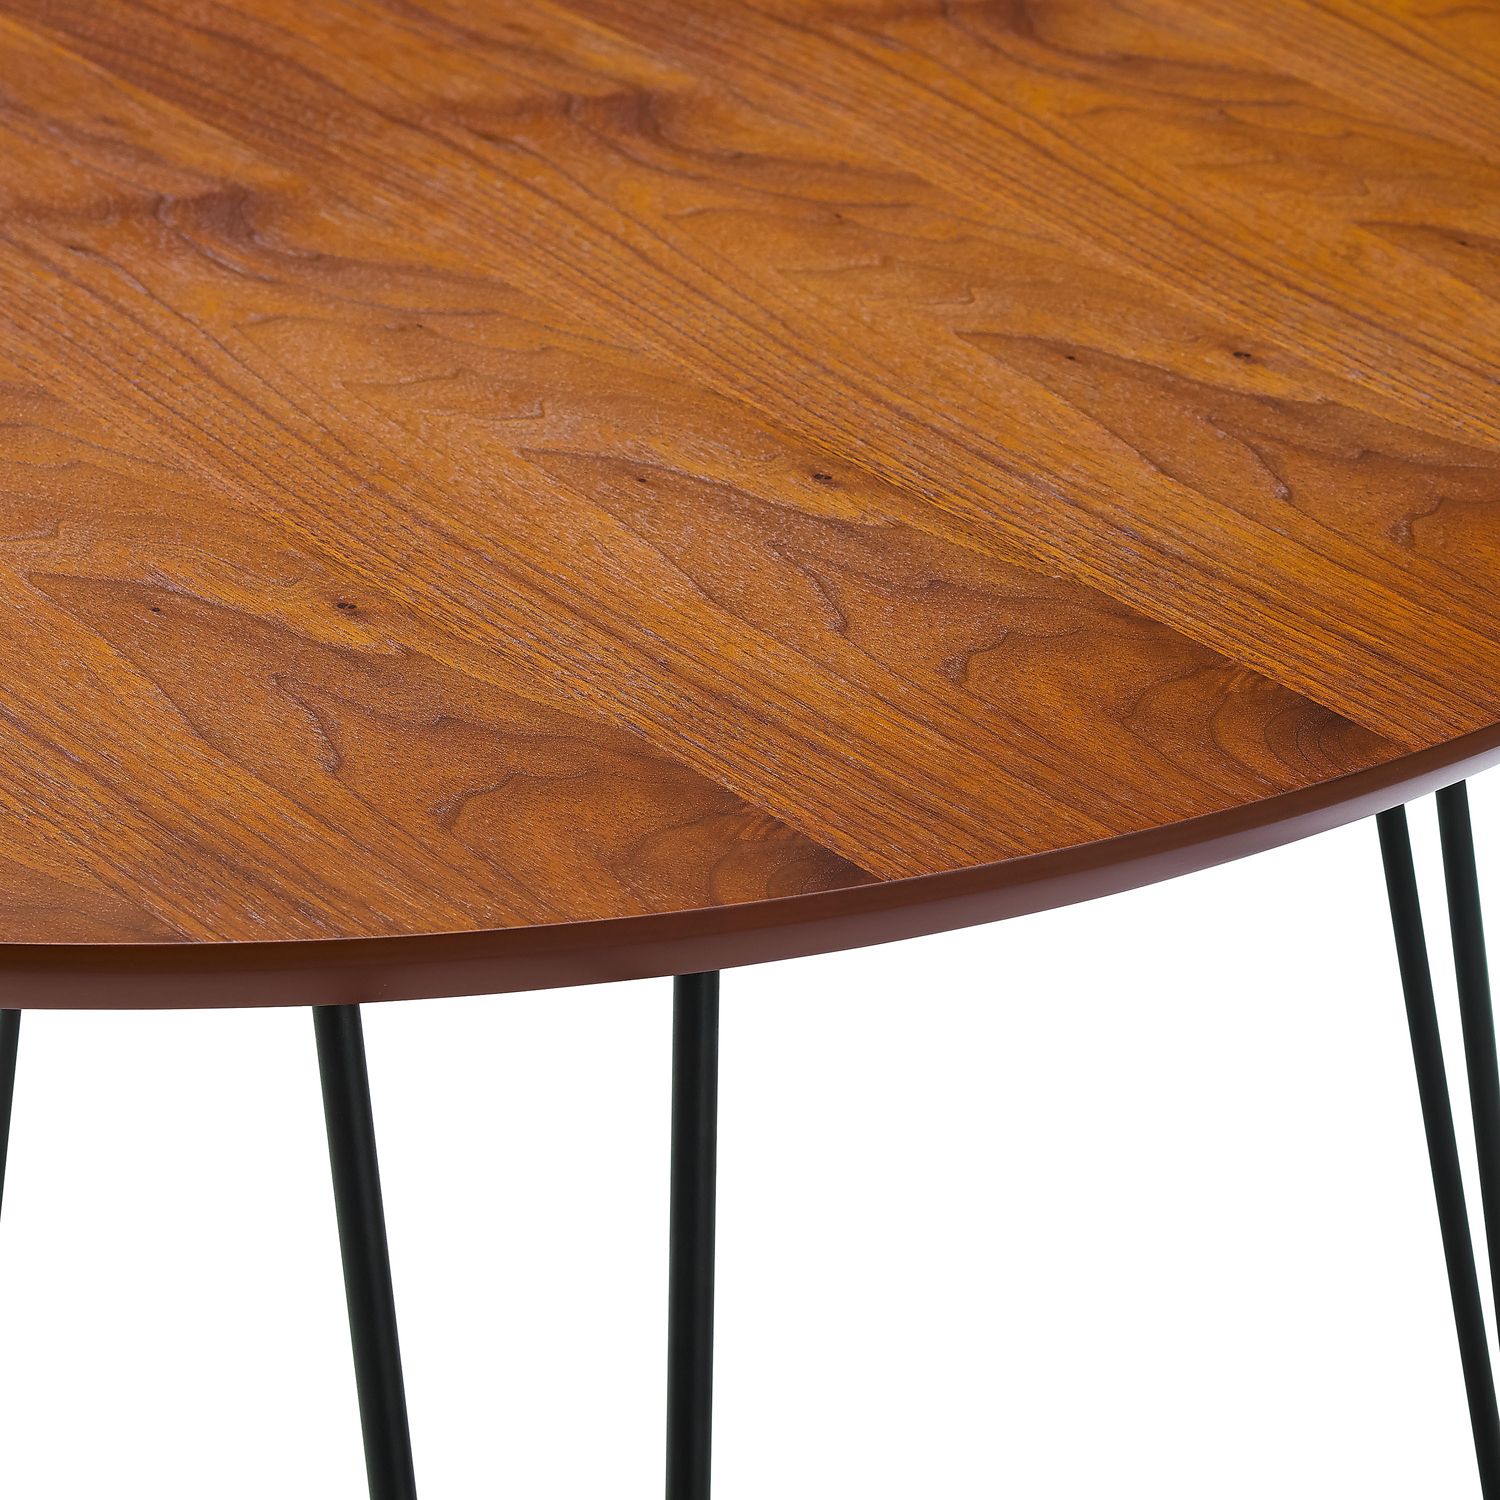 Most Popular Round Hairpin Leg Dining Tables Throughout Mid Century Modern Round Walnut Hairpin 46" Dining Table (View 15 of 15)